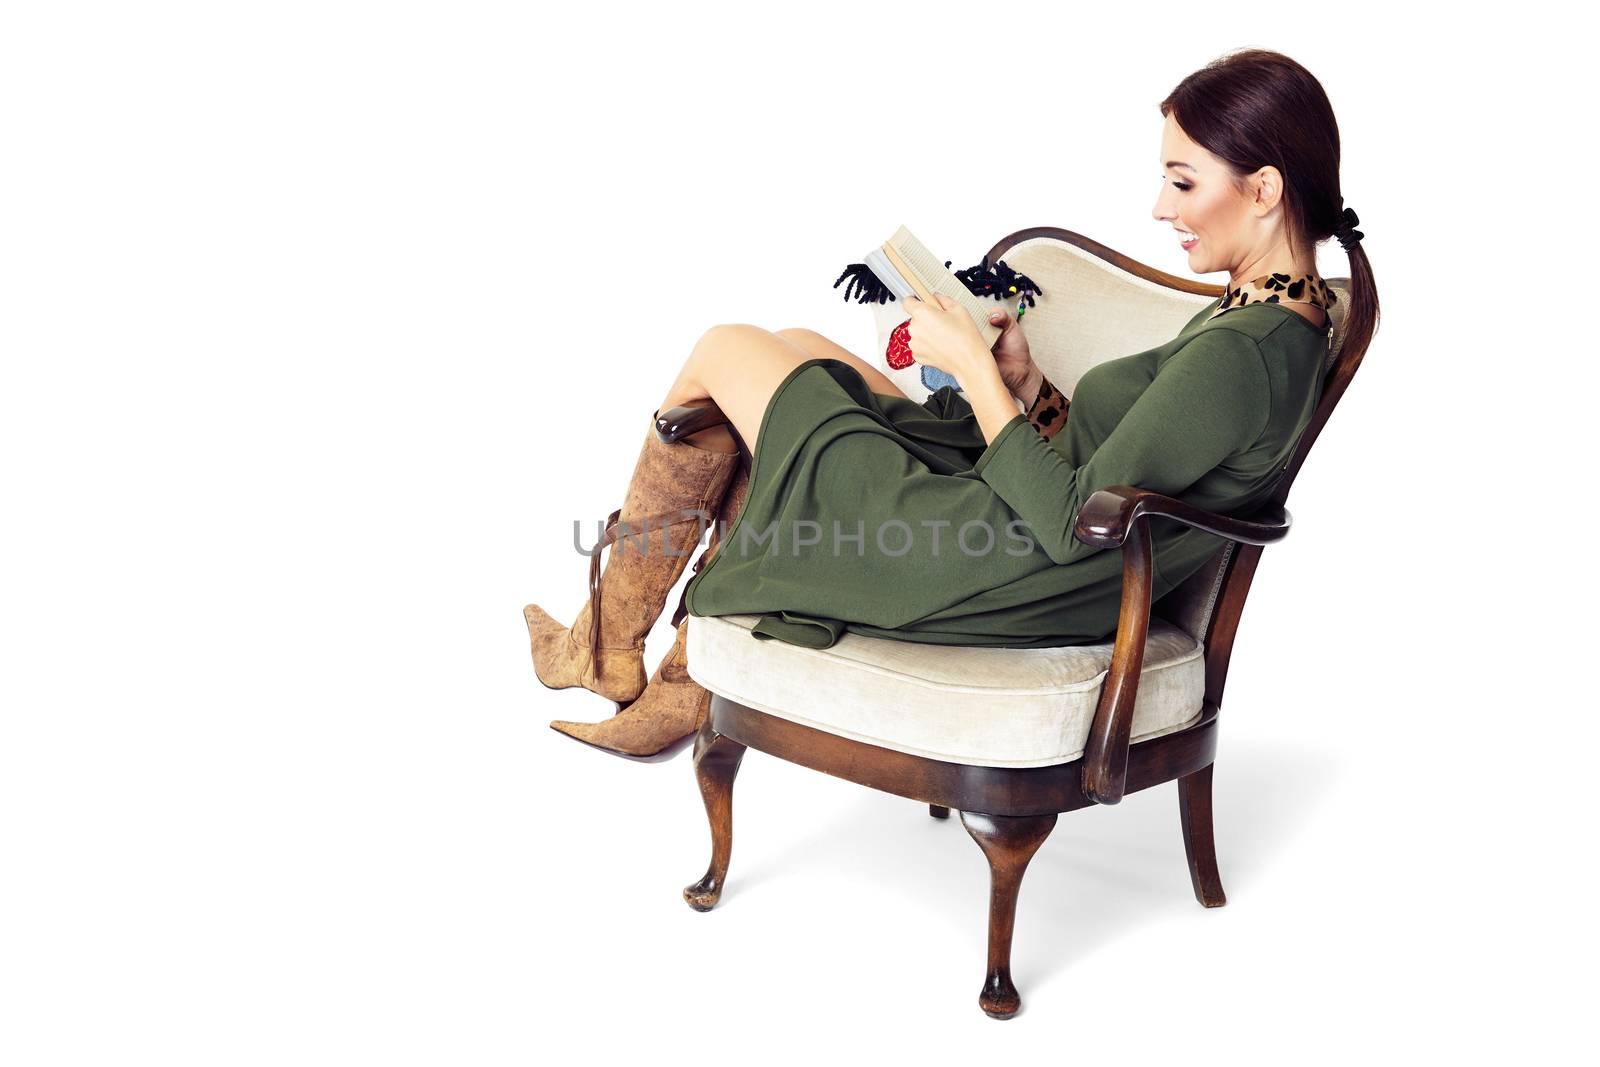 Cheerful woman sitting on chair and reading a book. Isolated on white background.